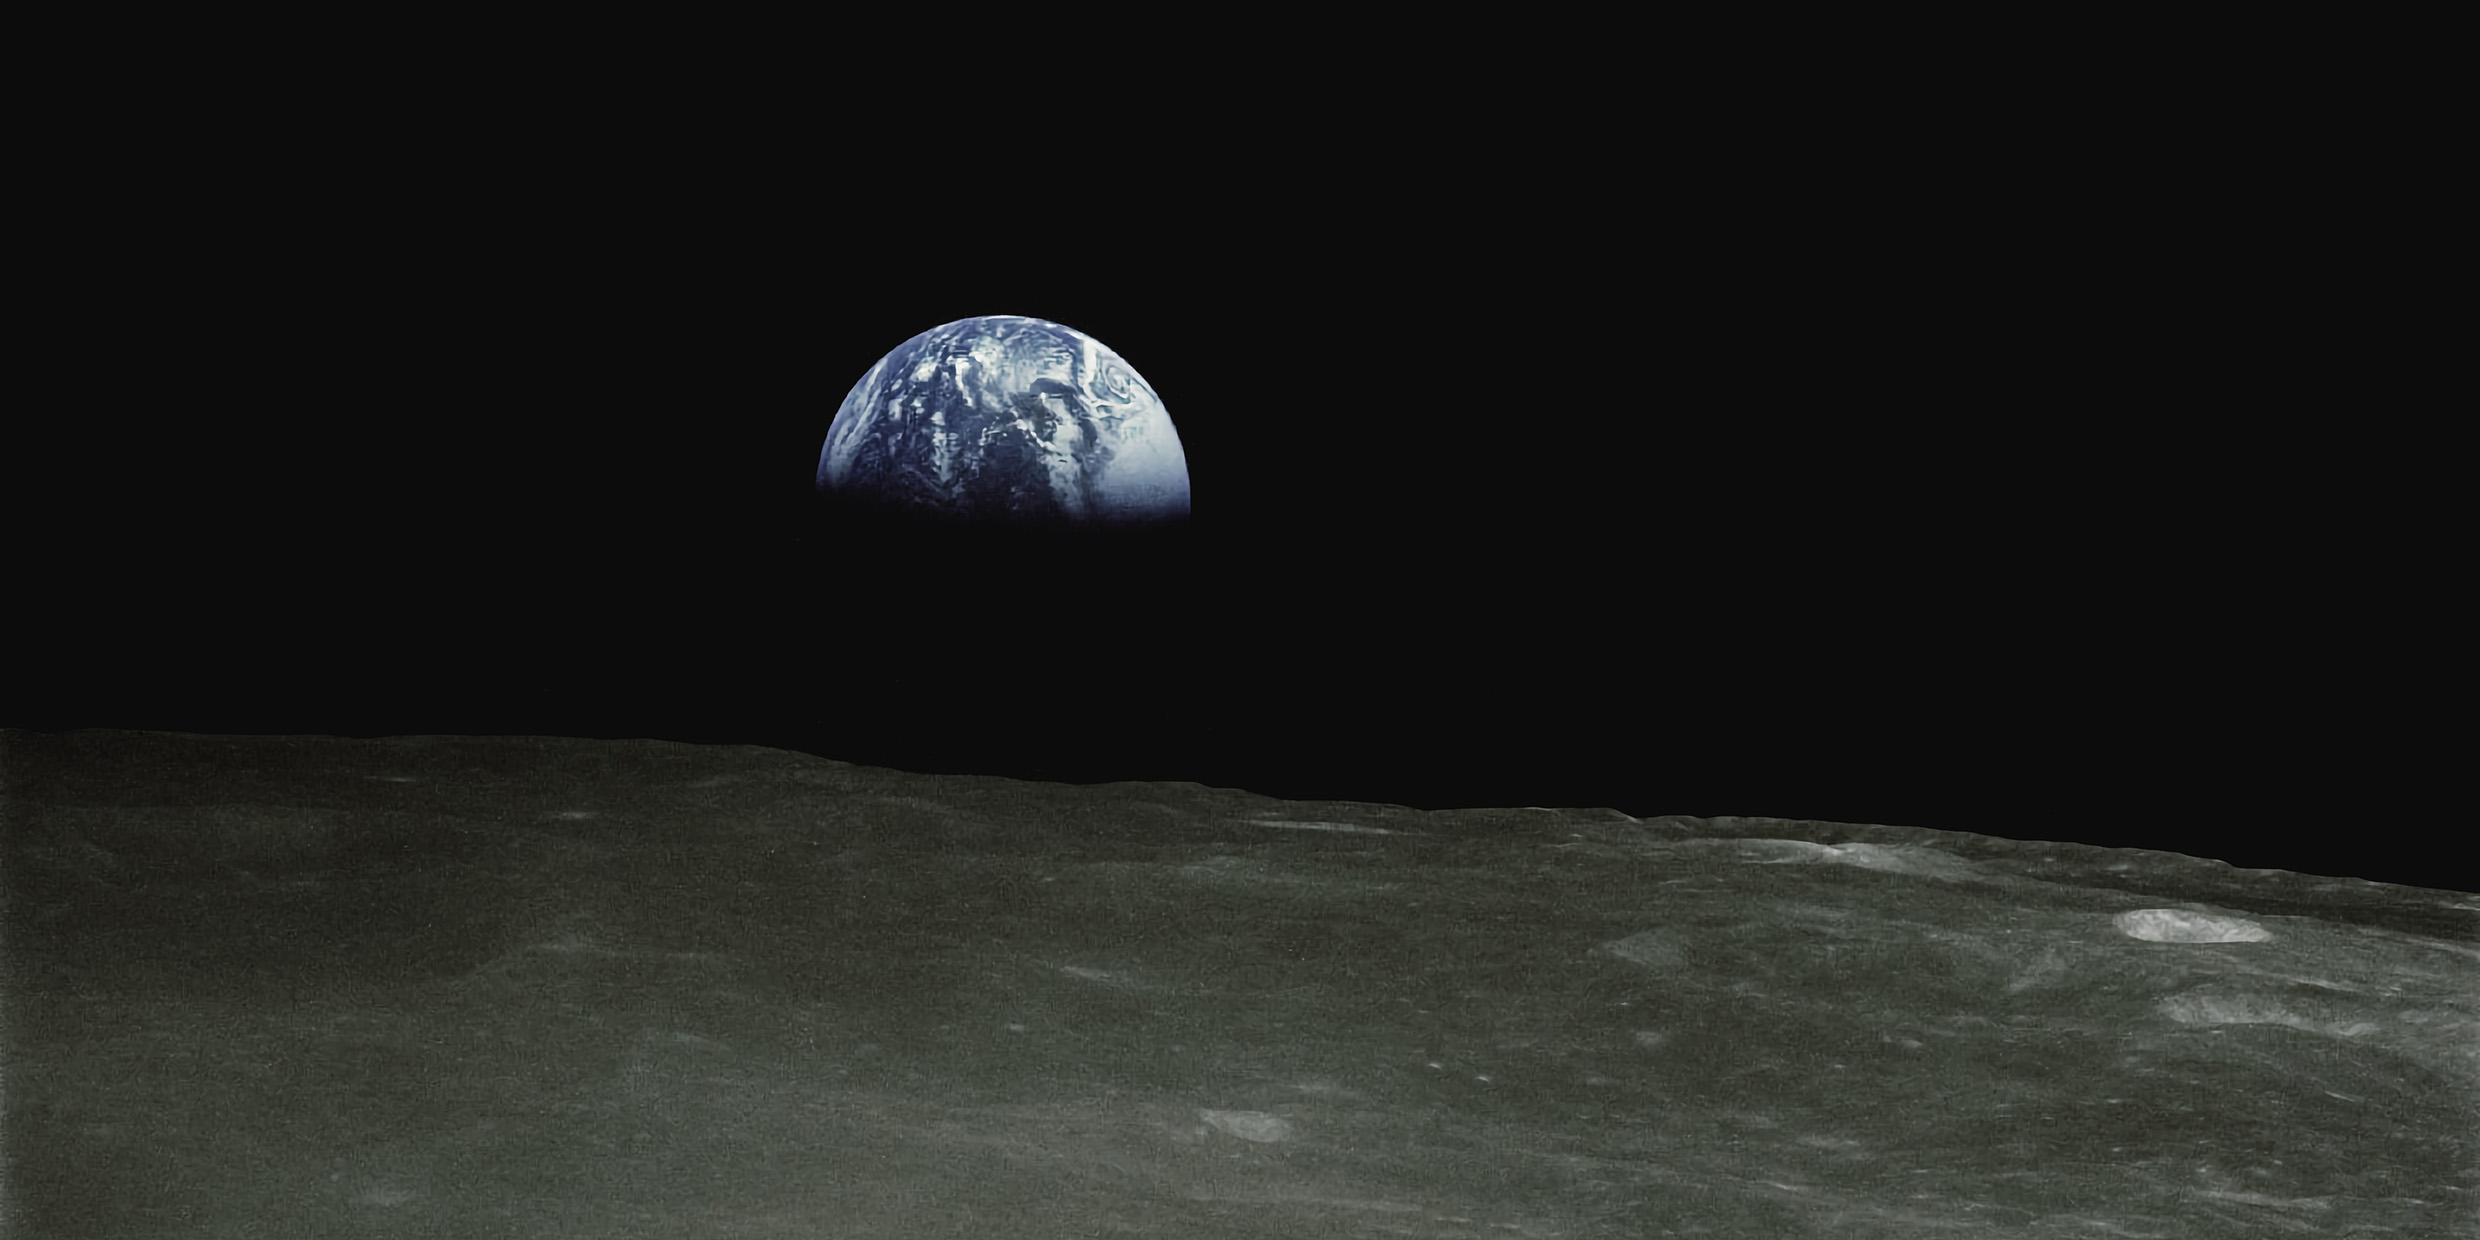 Image of the Earth as seen from lunar orbit